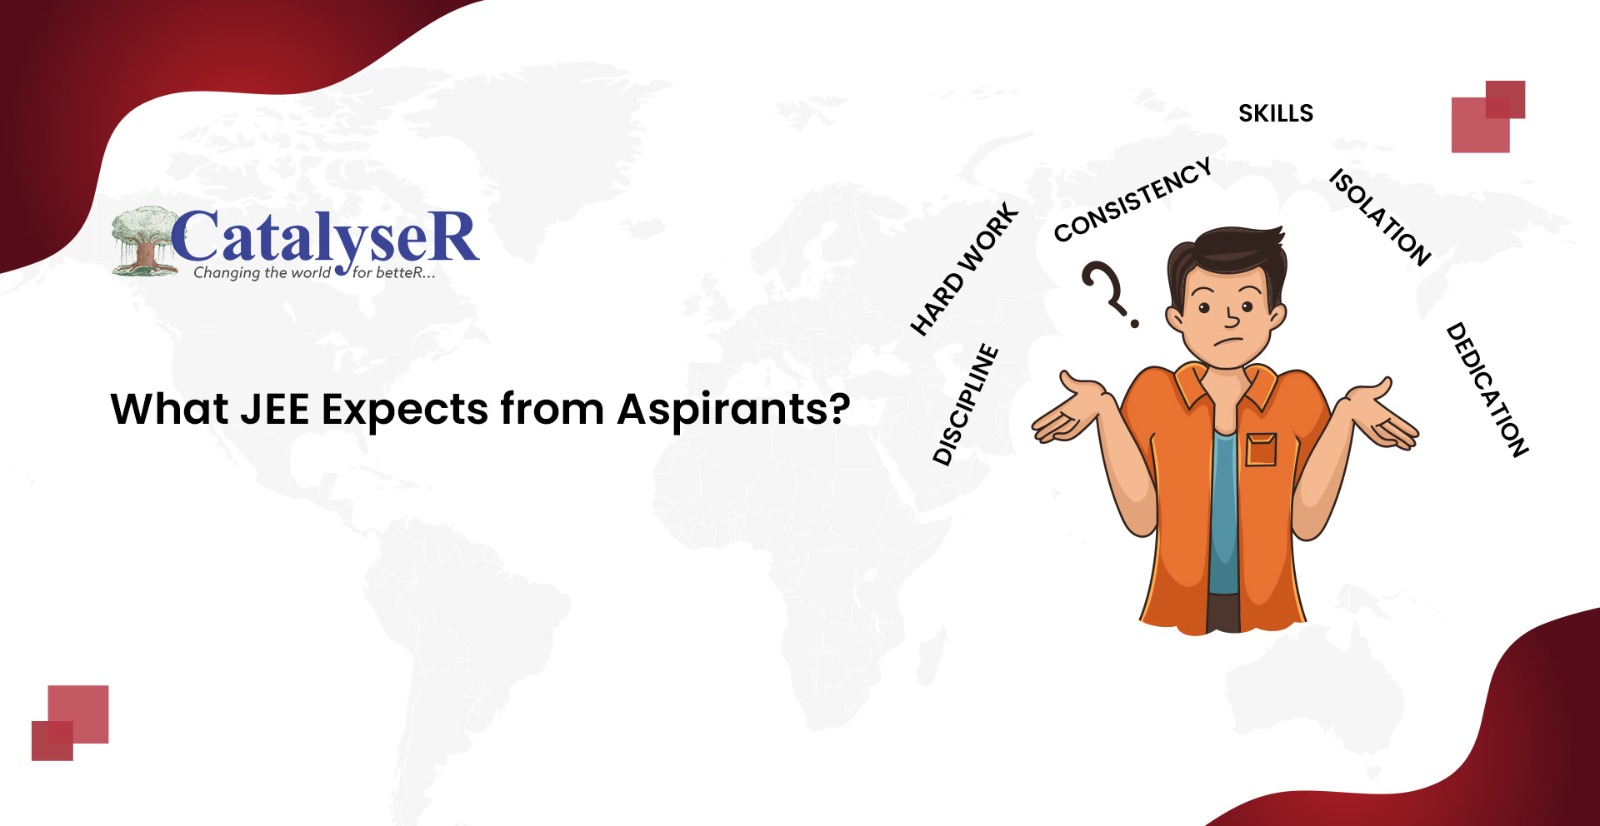 What JEE Expects from Aspirants?